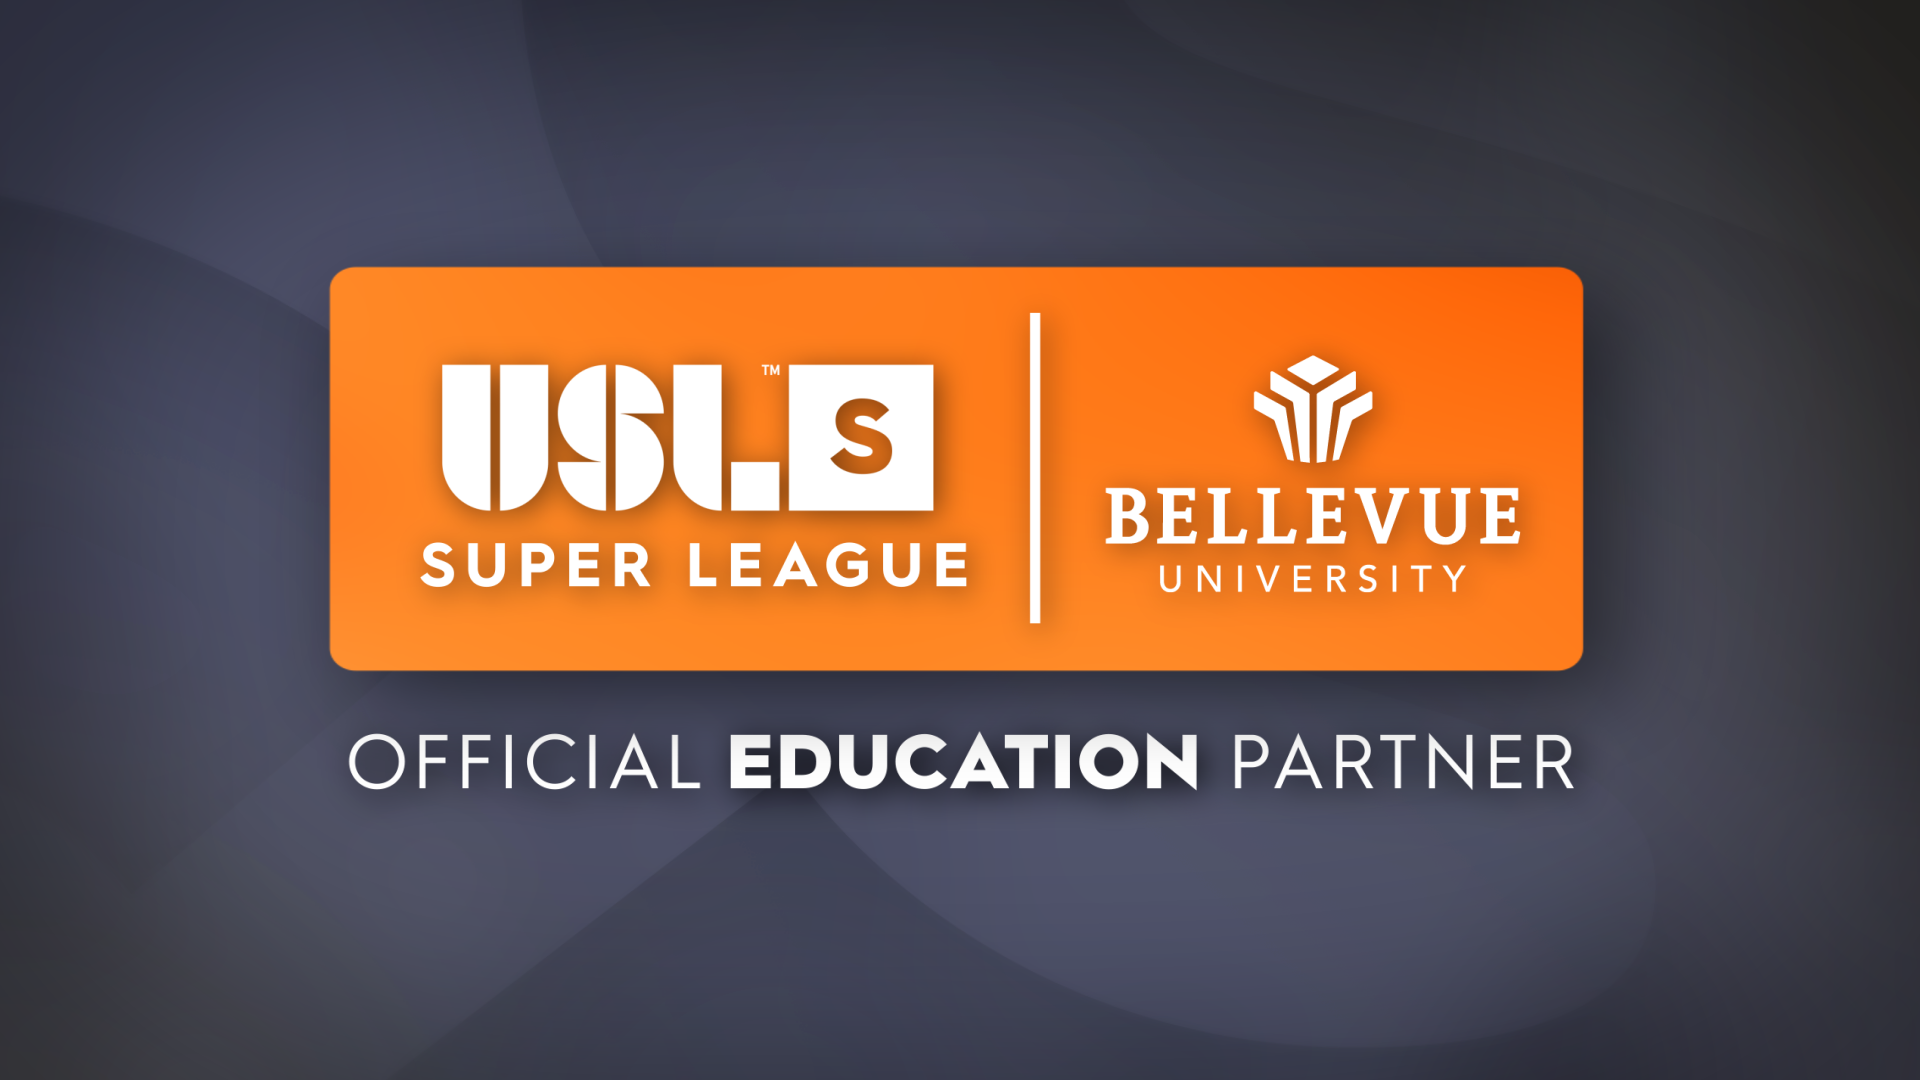 USL Super League and Bellevue University Announce Partnership to Provide Education Opportunities for League Players, Staff and Fans  featured image